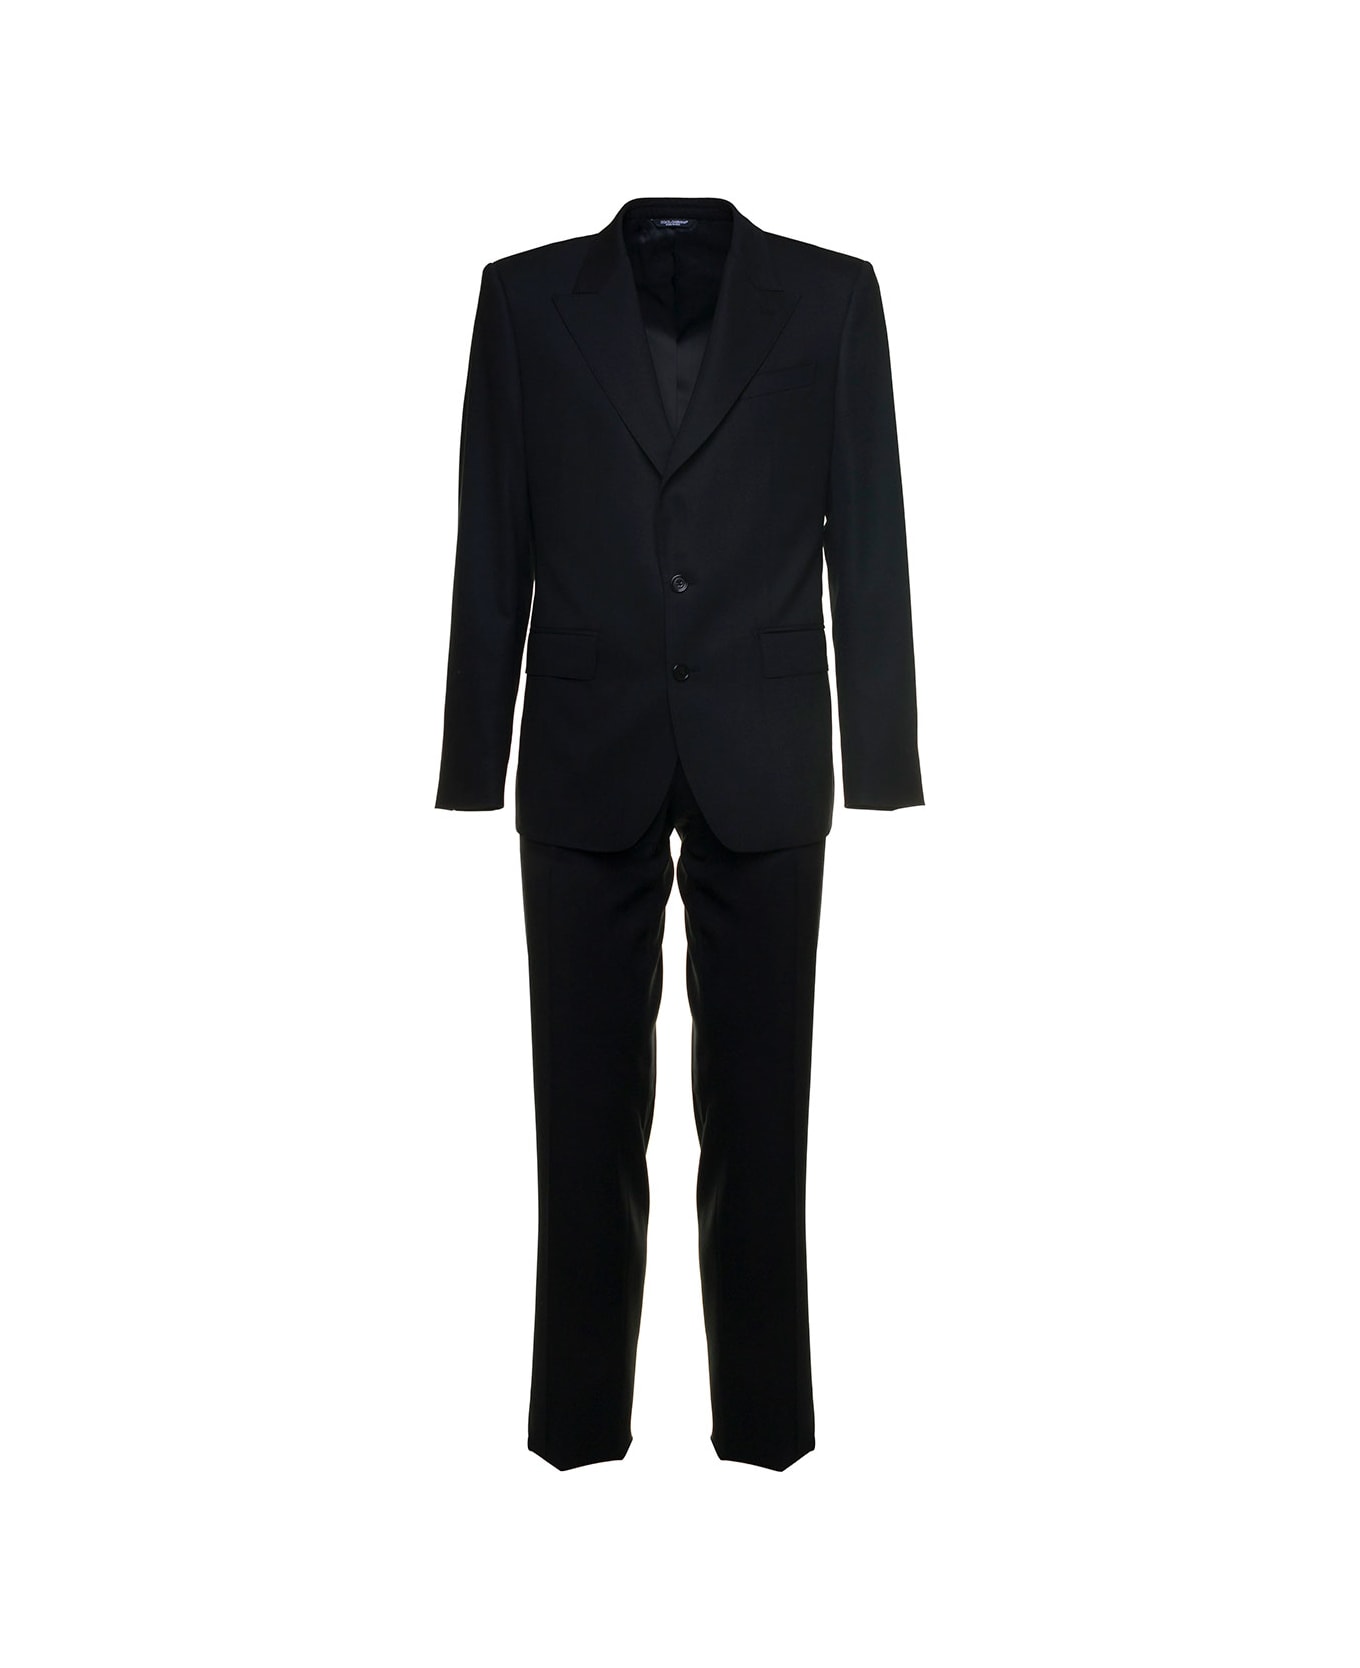 Dolce & Gabbana Man's Single-breasted  Black Wool Tailored Suit - Black